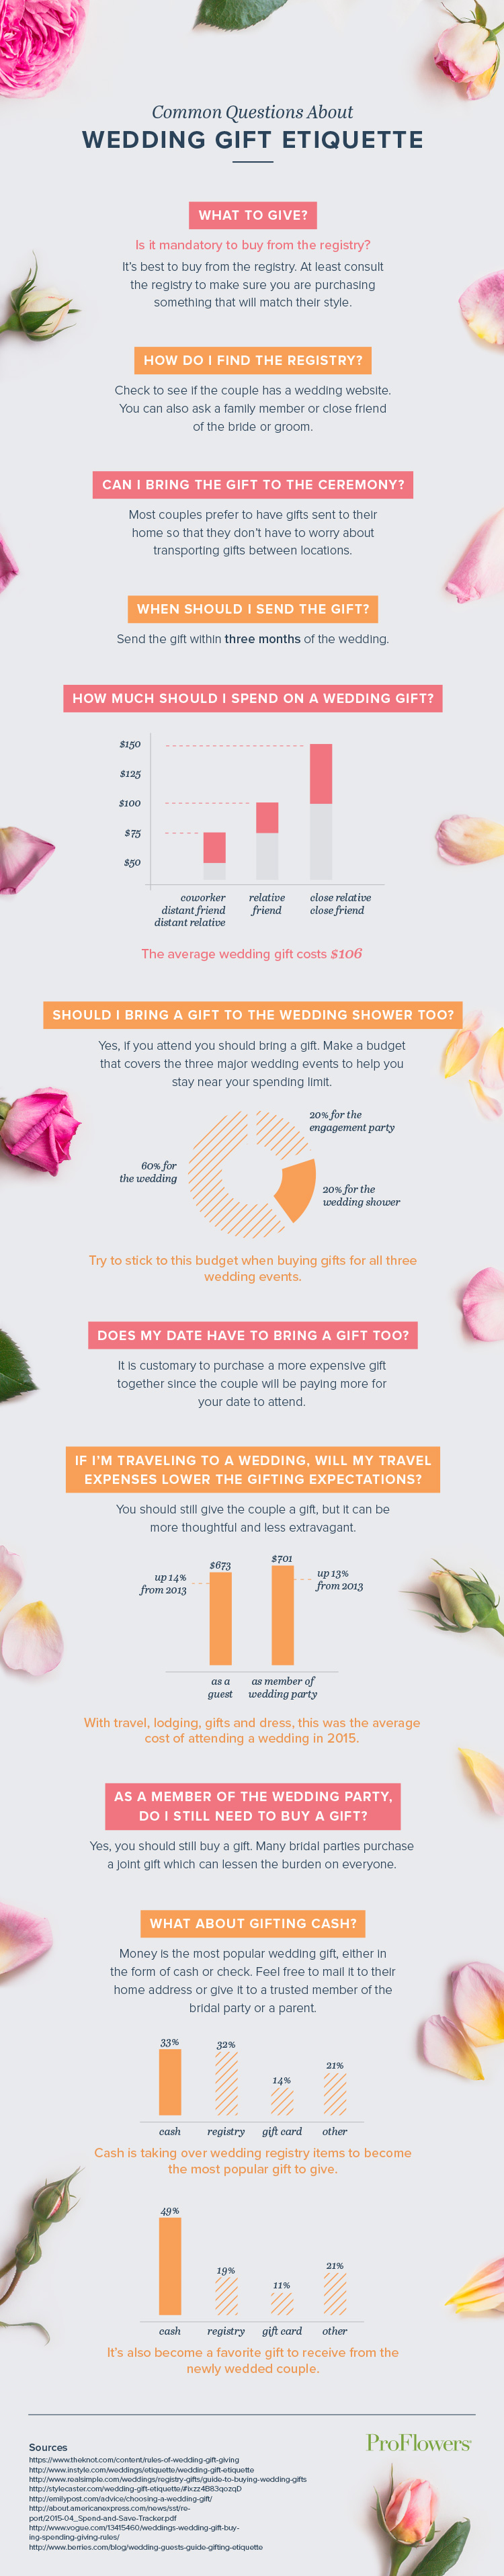 The Engagement Party Gift Etiquette Guide for Guests